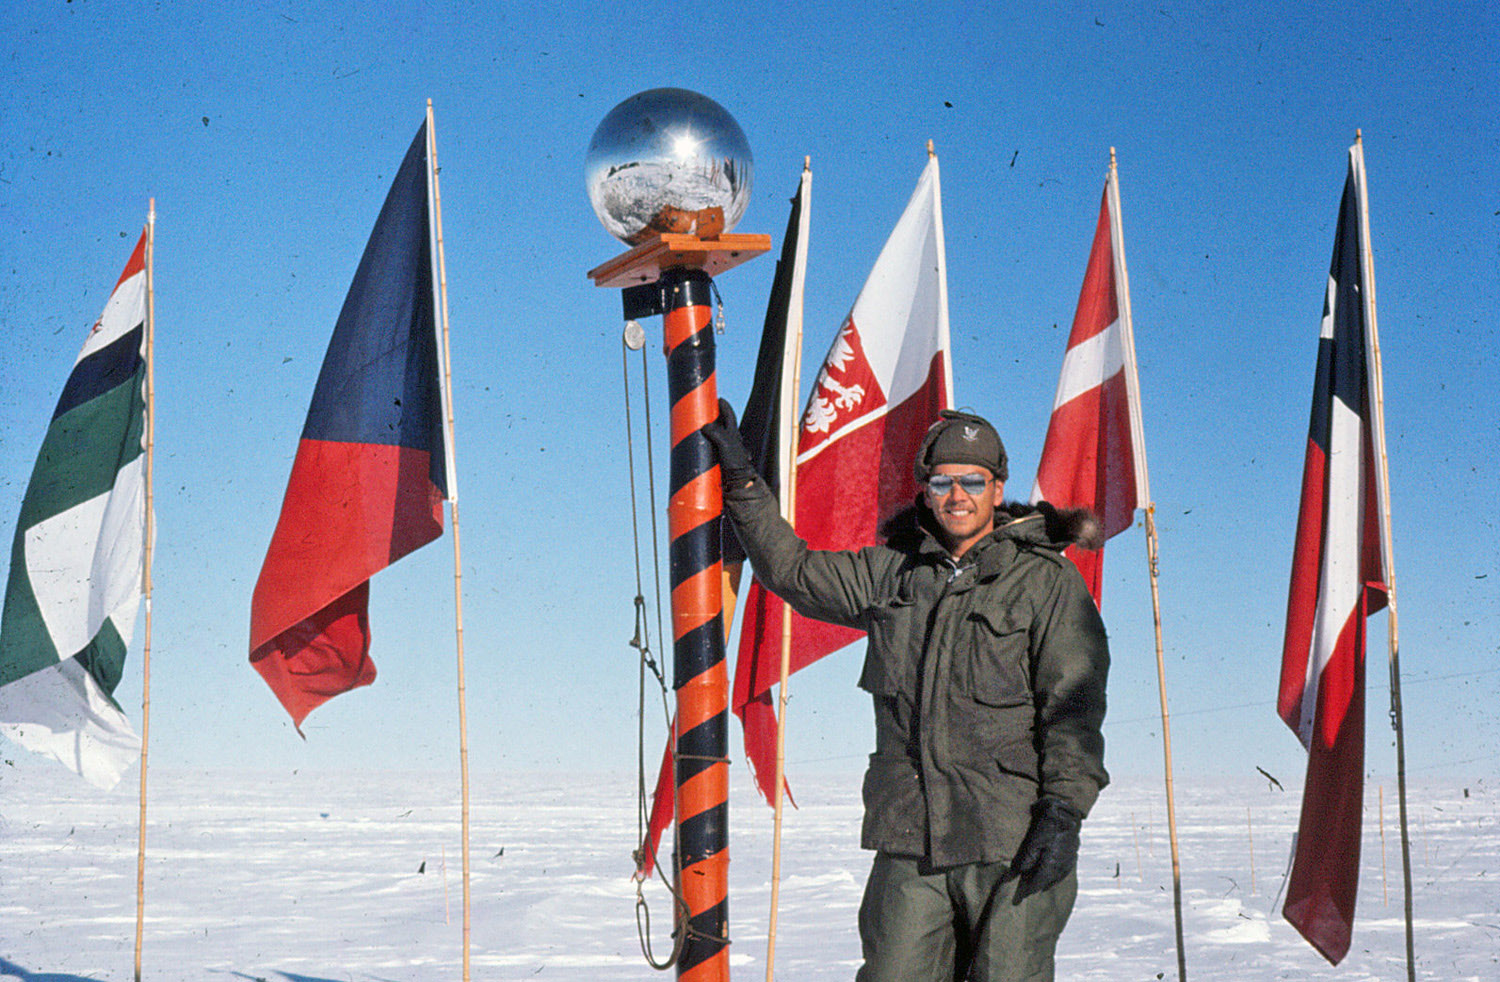 Dudley Vaughan at the South Pole